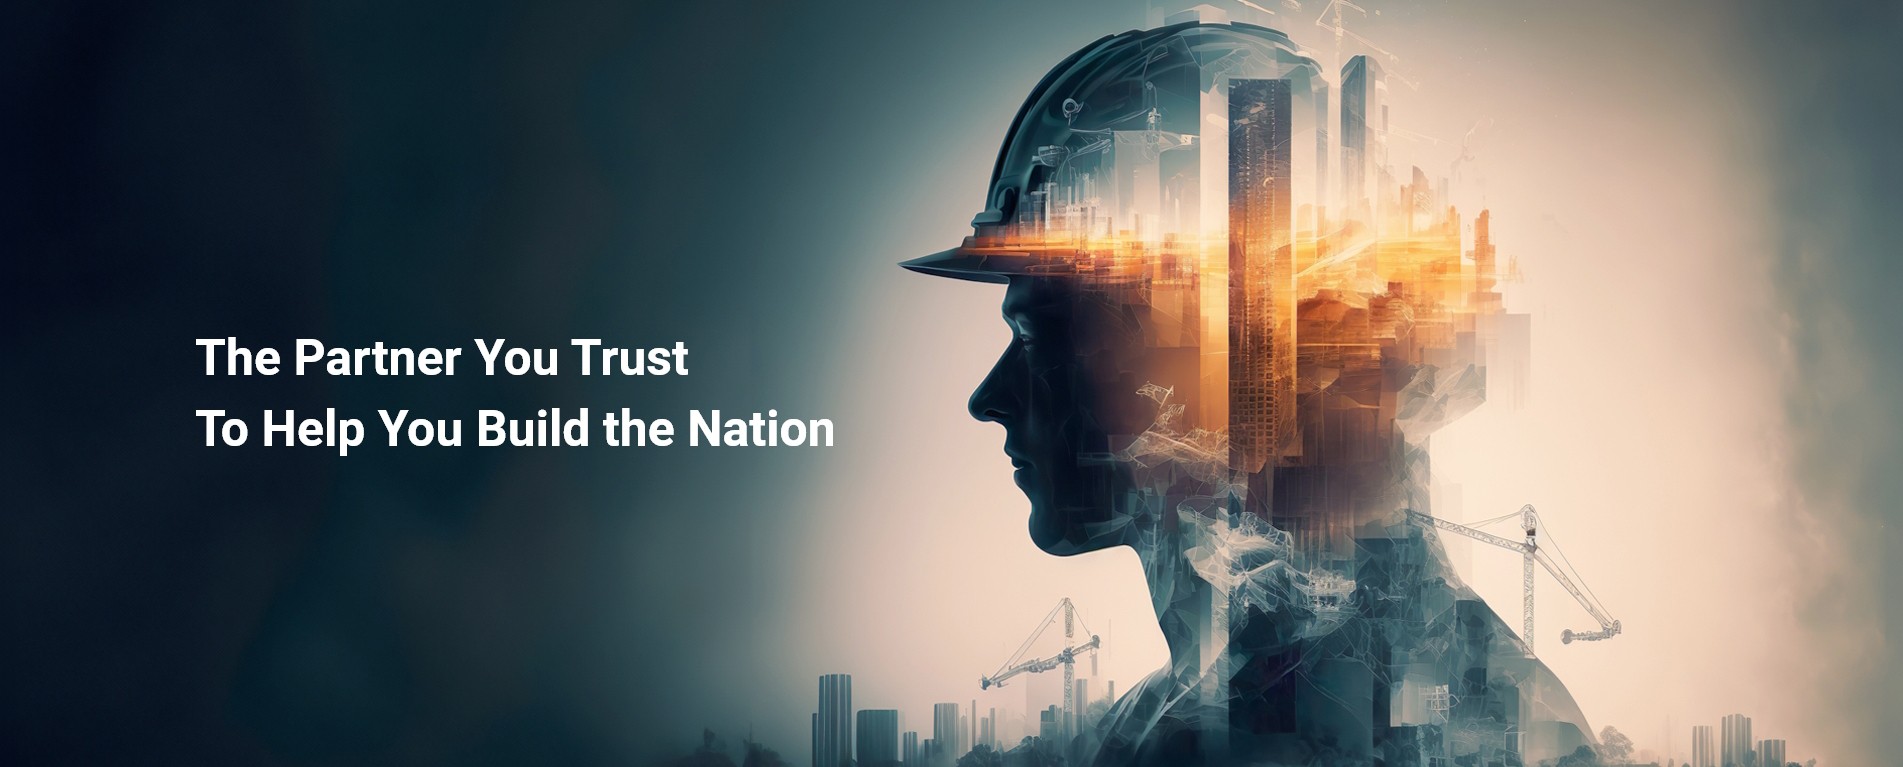 The Partner You Trust To Help You Build the Nation Desktop